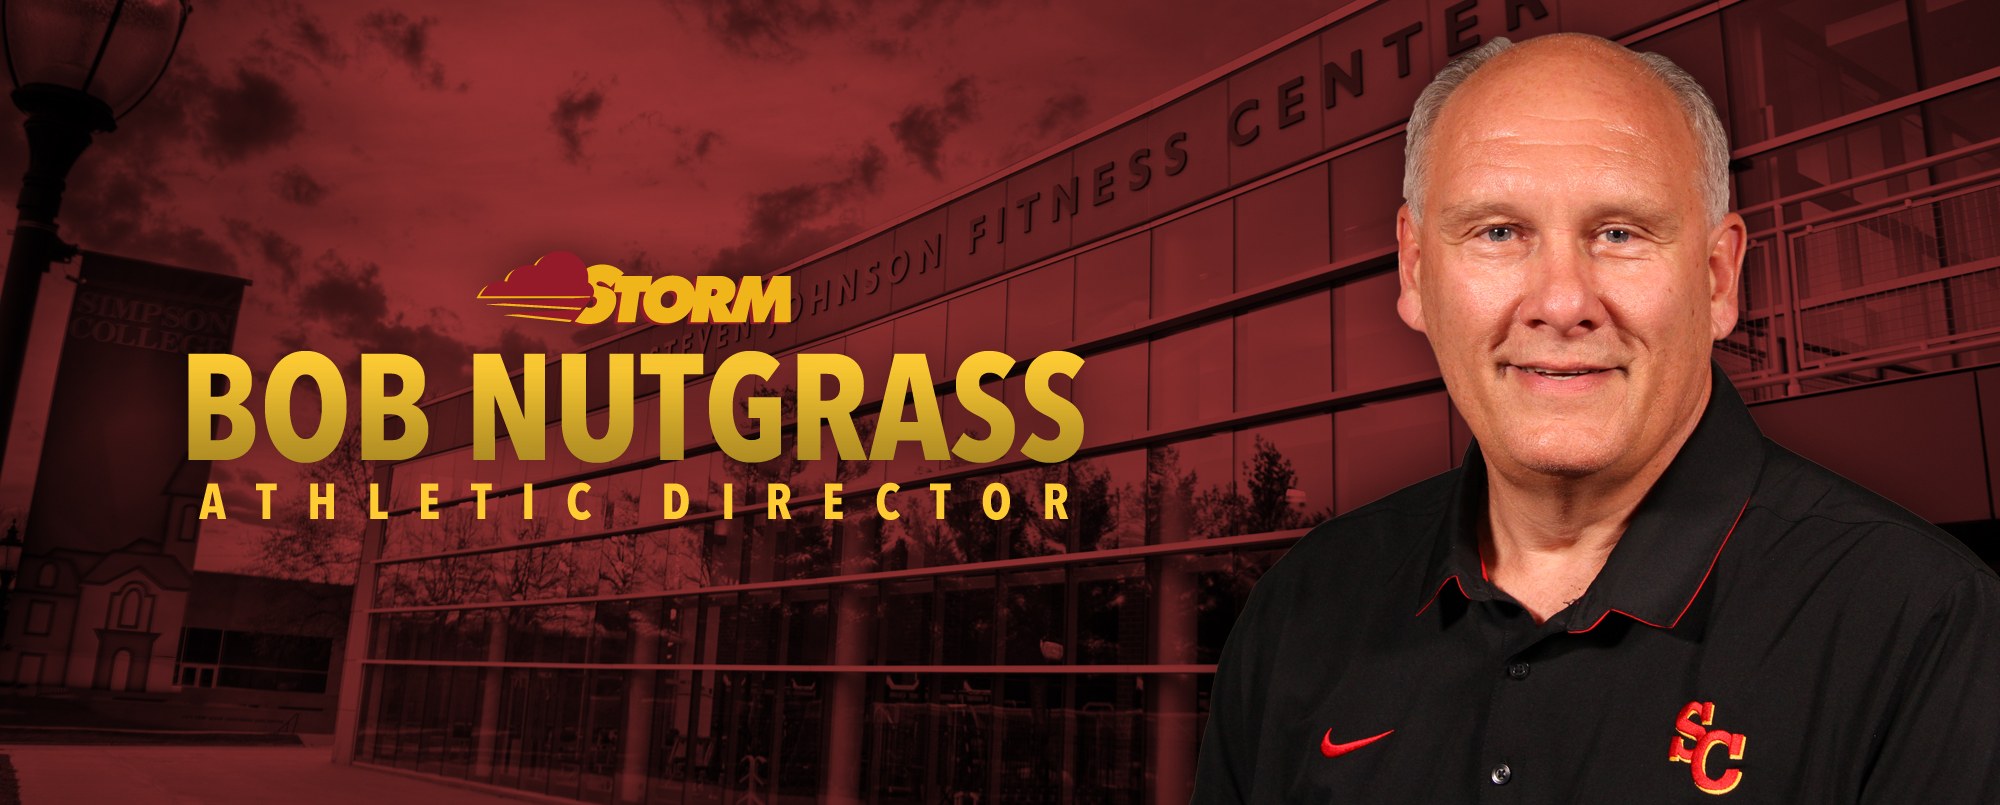 Bob Nutgrass appointed Athletic Director